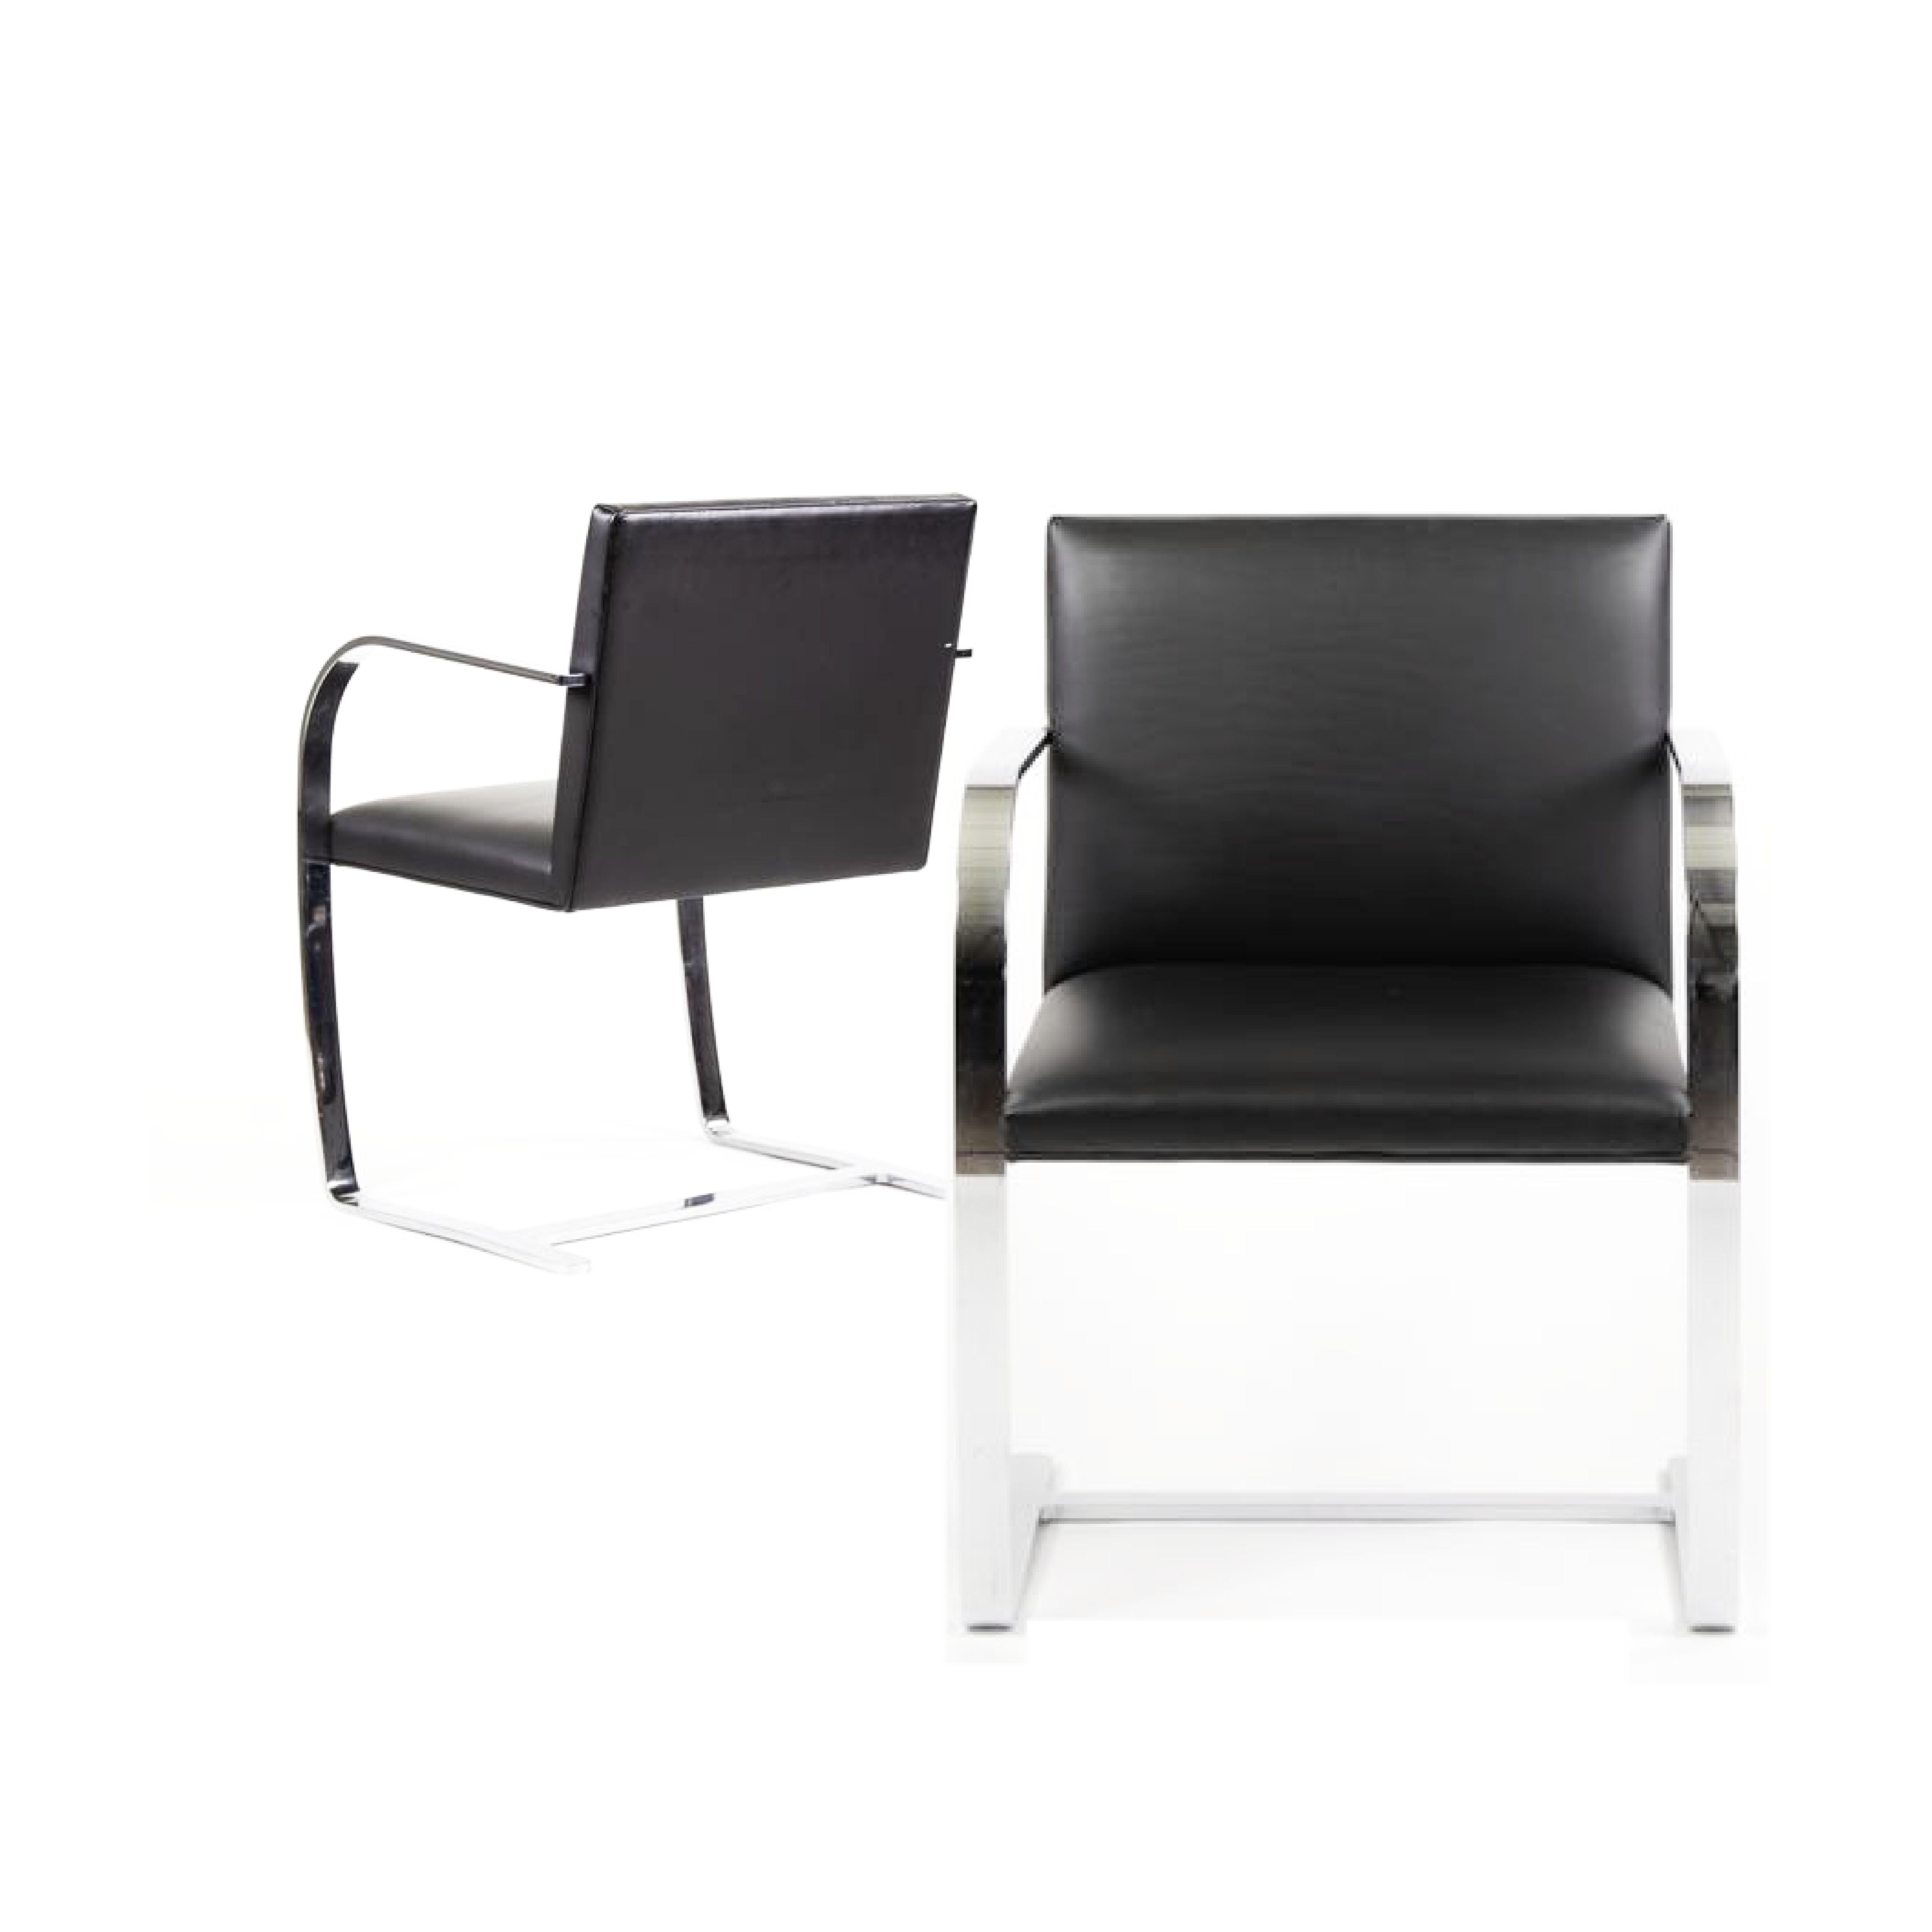 Designed by Mies van der Rohe in 1930 for his renowned Tugendhat House in Brno, Czech Republic, the Brno chair reflects the groundbreaking simplicity of its original environment. The chair, an icon of 20th century design, is celebrated for its lean